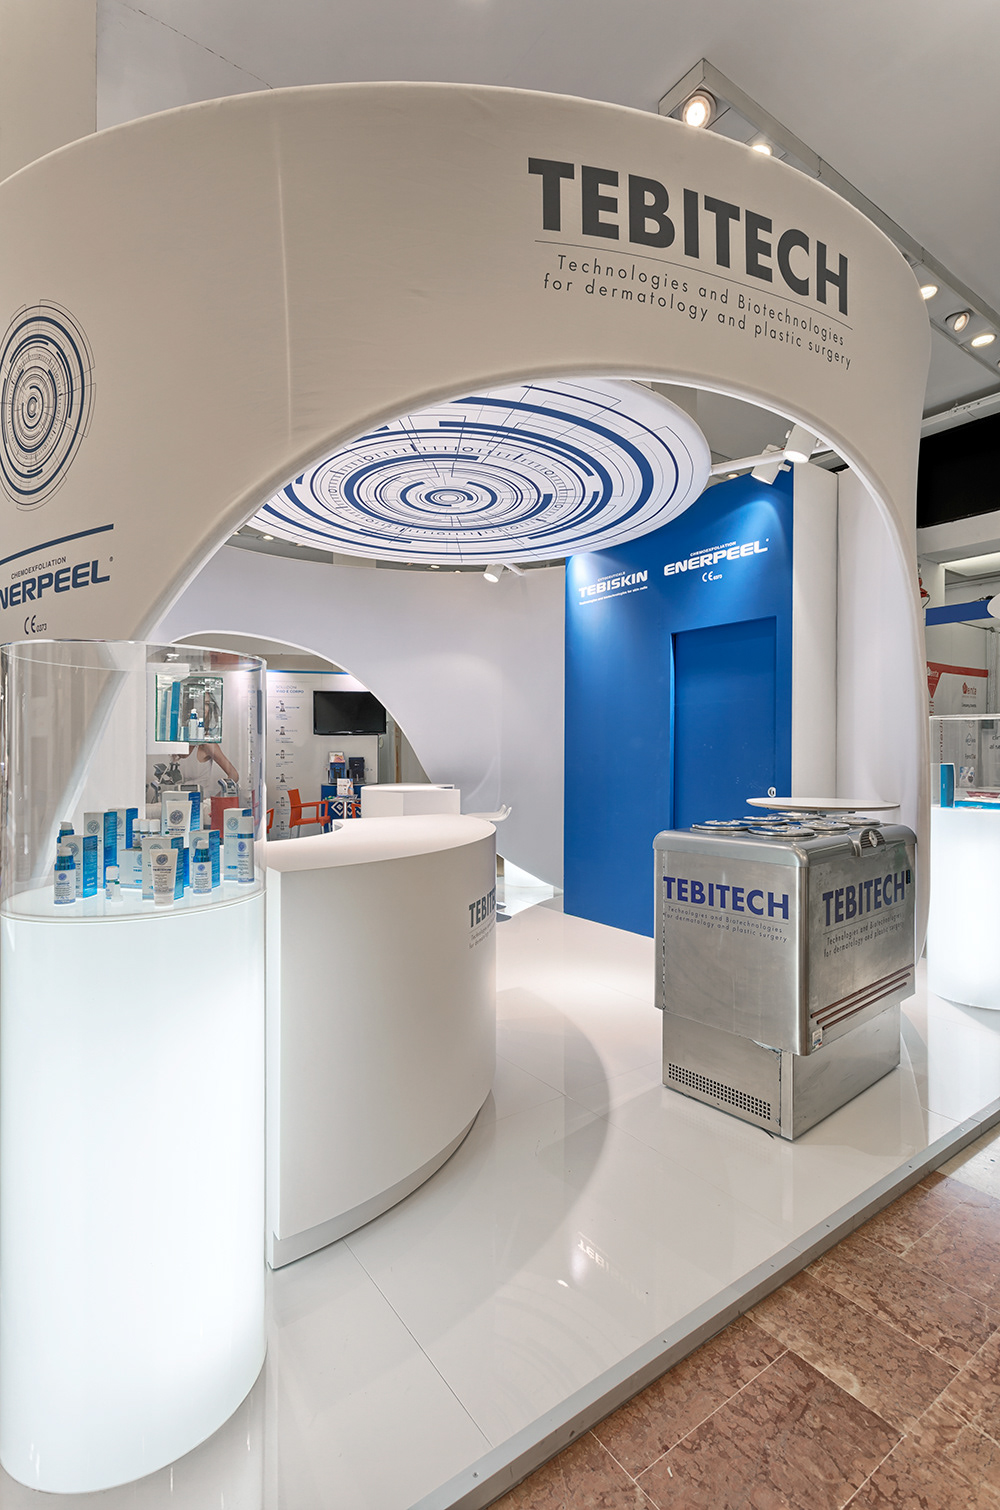 booth design congress Fair Health Messe pharmacy Stand tradeshow